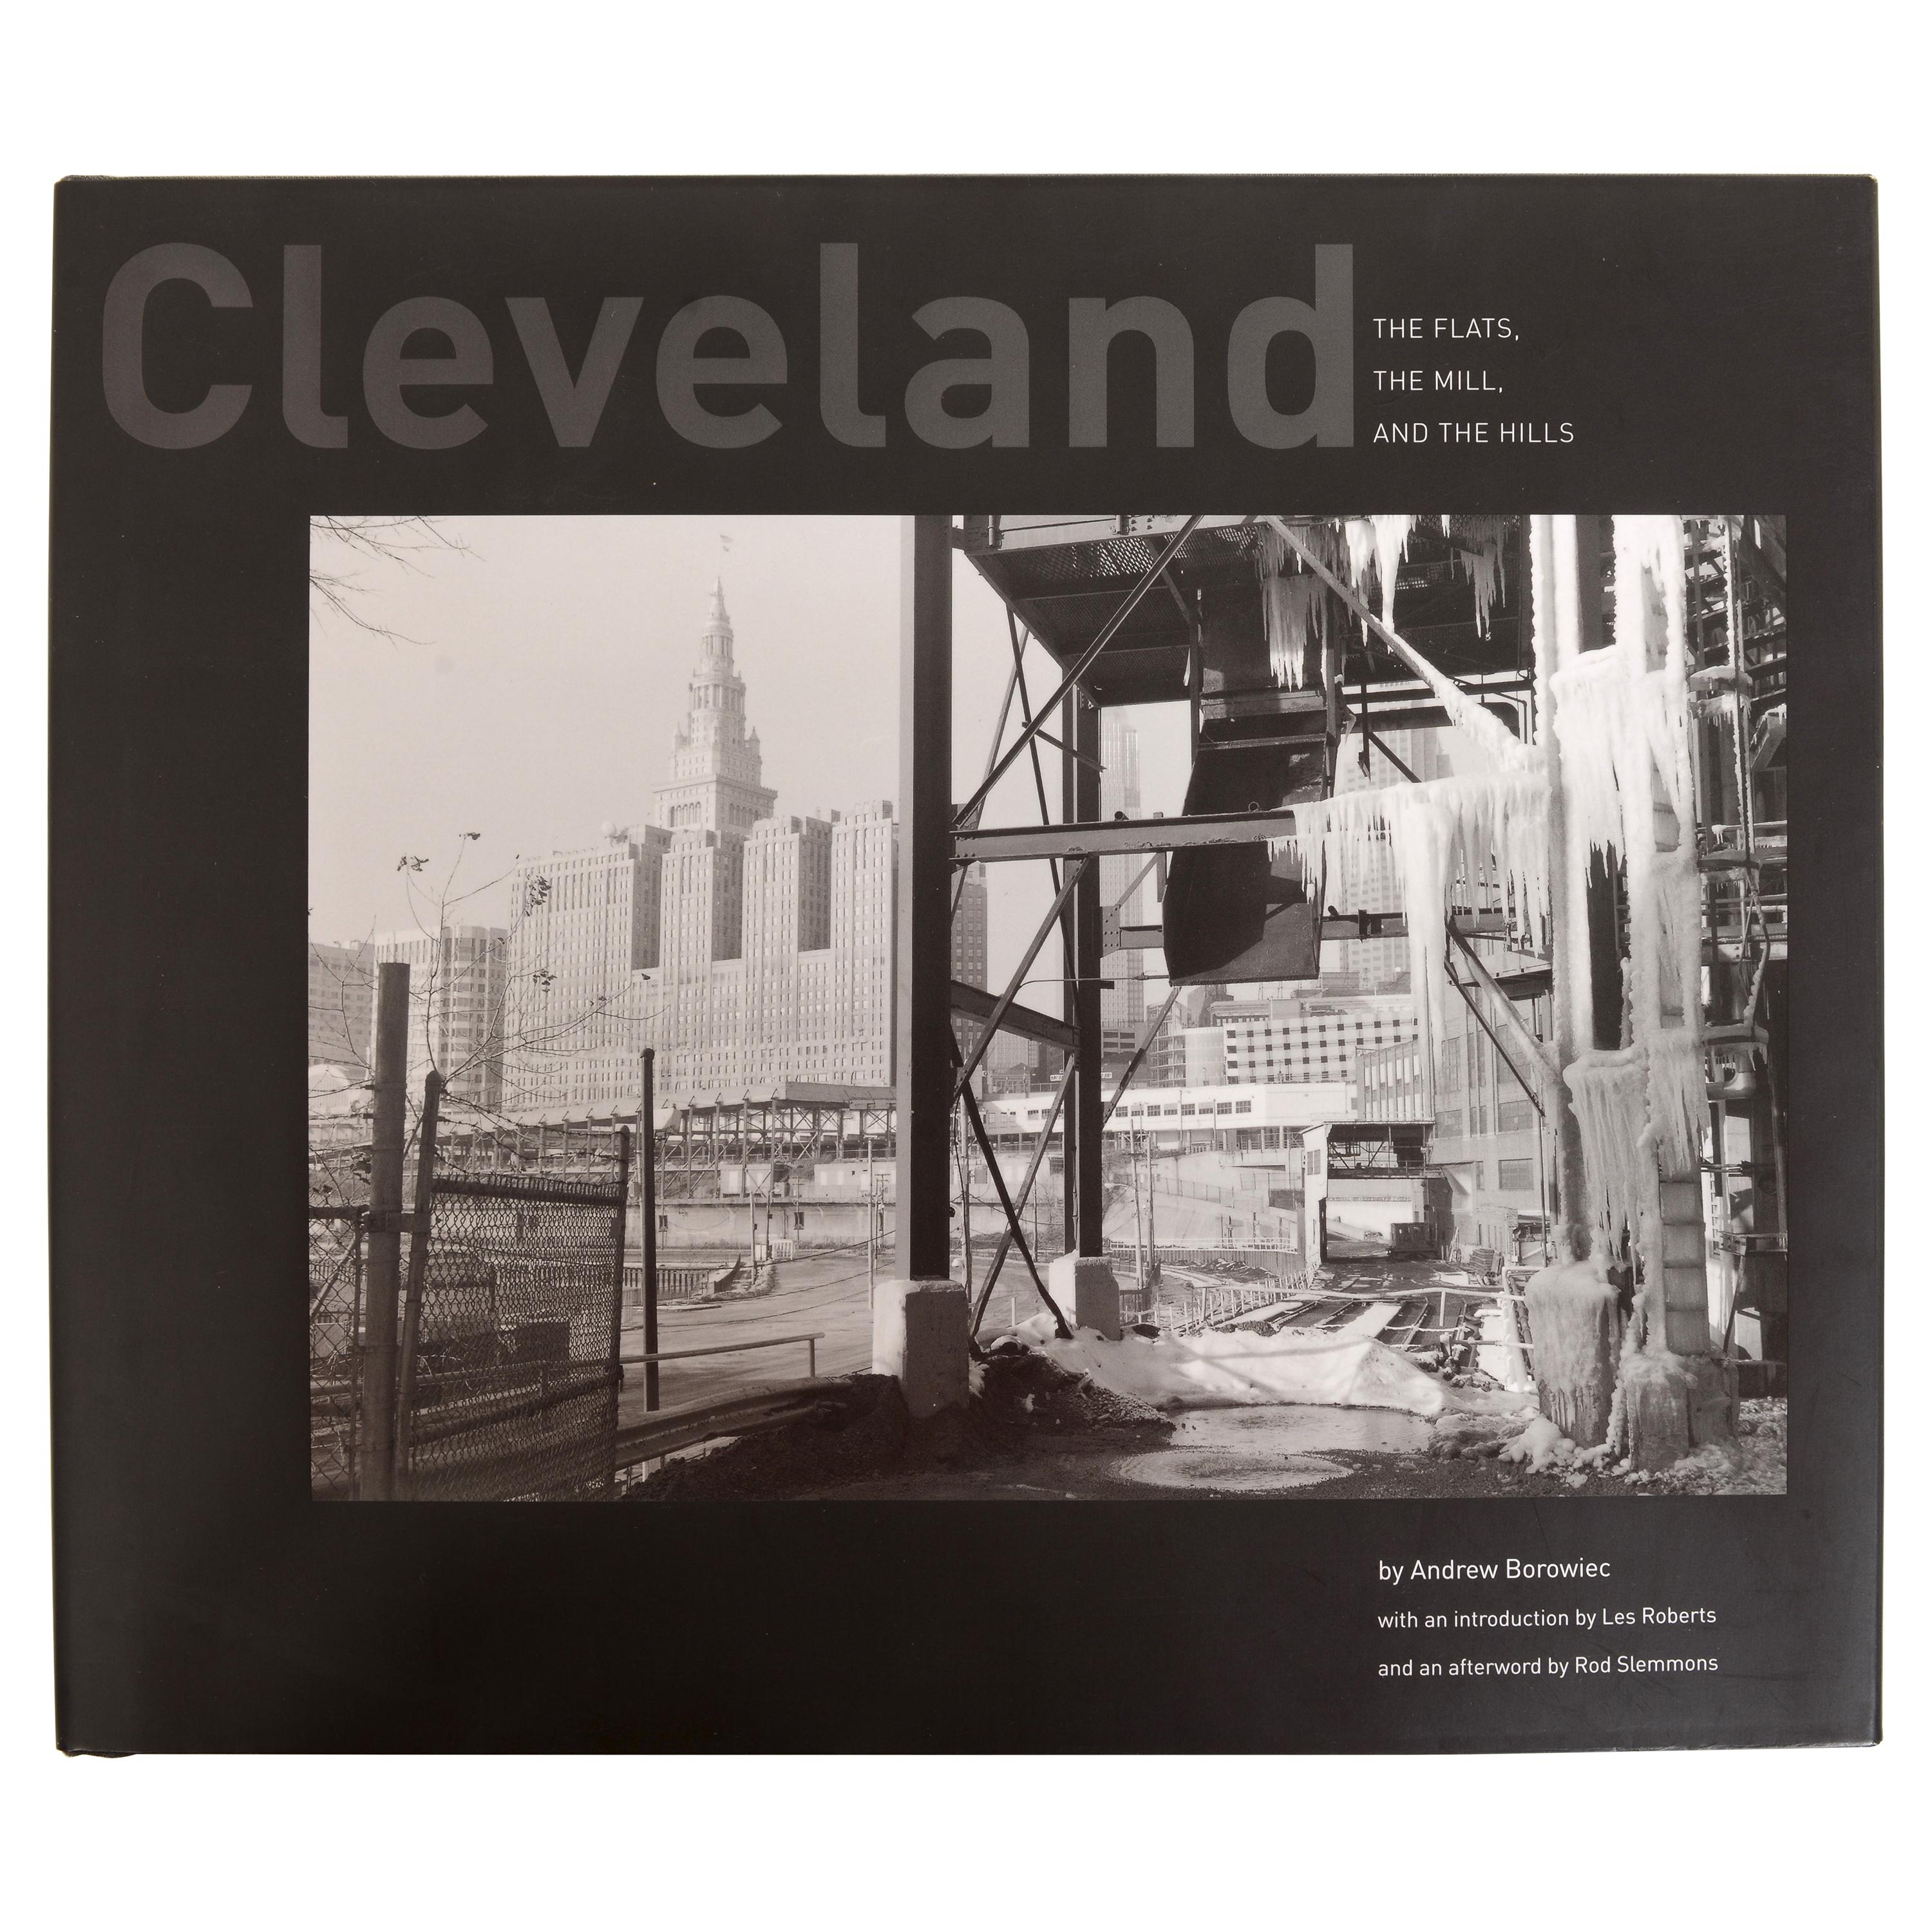 Cleveland The Flats, the Mill, and the Hills by Andrew Borowiec